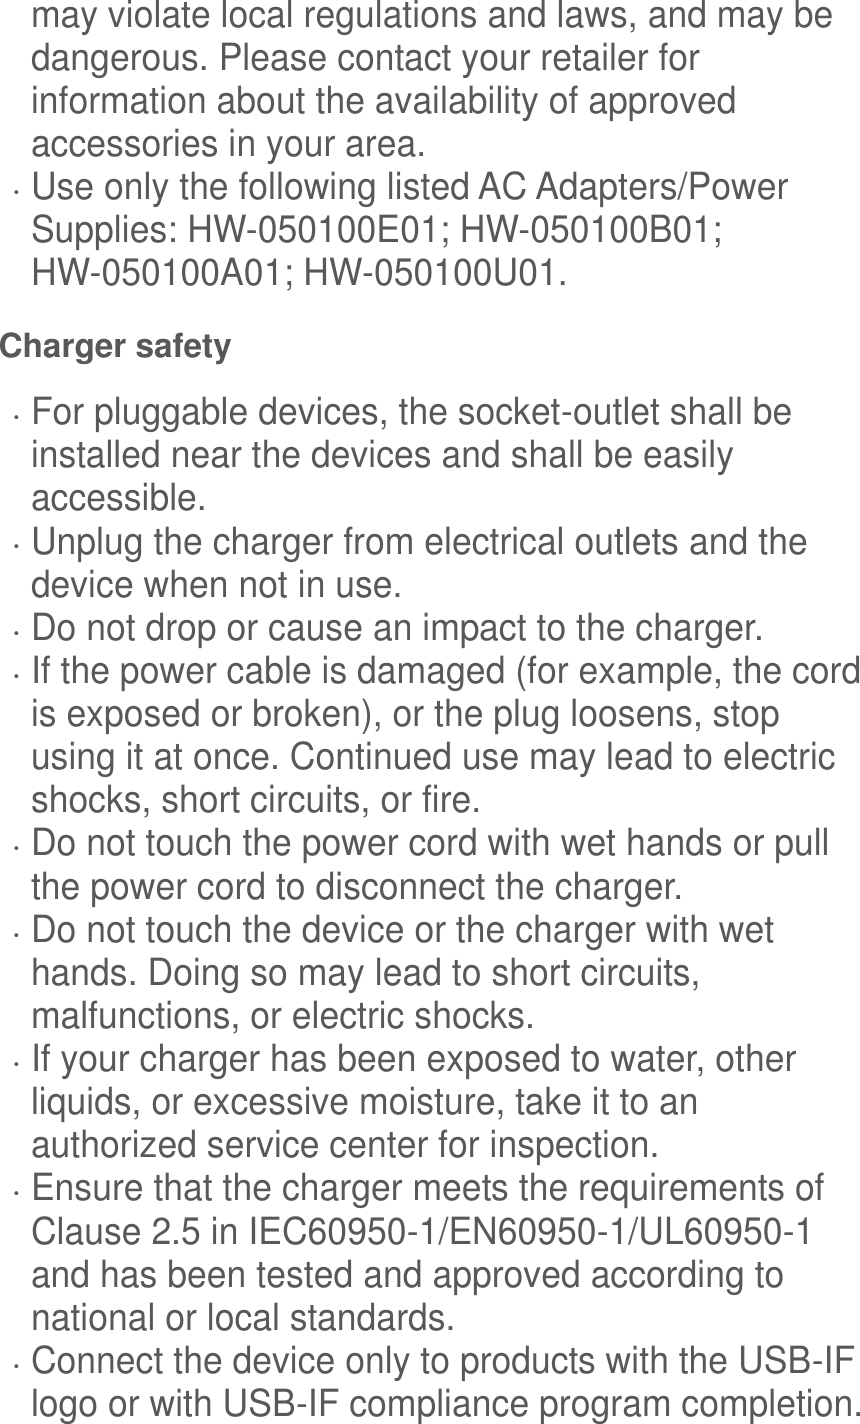  may violate local regulations and laws, and may be dangerous. Please contact your retailer for information about the availability of approved accessories in your area.  Use only the following listed AC Adapters/Power Supplies: HW-050100E01; HW-050100B01; HW-050100A01; HW-050100U01. Charger safety  For pluggable devices, the socket-outlet shall be installed near the devices and shall be easily accessible.  Unplug the charger from electrical outlets and the device when not in use.  Do not drop or cause an impact to the charger.  If the power cable is damaged (for example, the cord is exposed or broken), or the plug loosens, stop using it at once. Continued use may lead to electric shocks, short circuits, or fire.  Do not touch the power cord with wet hands or pull the power cord to disconnect the charger.  Do not touch the device or the charger with wet hands. Doing so may lead to short circuits, malfunctions, or electric shocks.  If your charger has been exposed to water, other liquids, or excessive moisture, take it to an authorized service center for inspection.  Ensure that the charger meets the requirements of Clause 2.5 in IEC60950-1/EN60950-1/UL60950-1 and has been tested and approved according to national or local standards.  Connect the device only to products with the USB-IF logo or with USB-IF compliance program completion. 